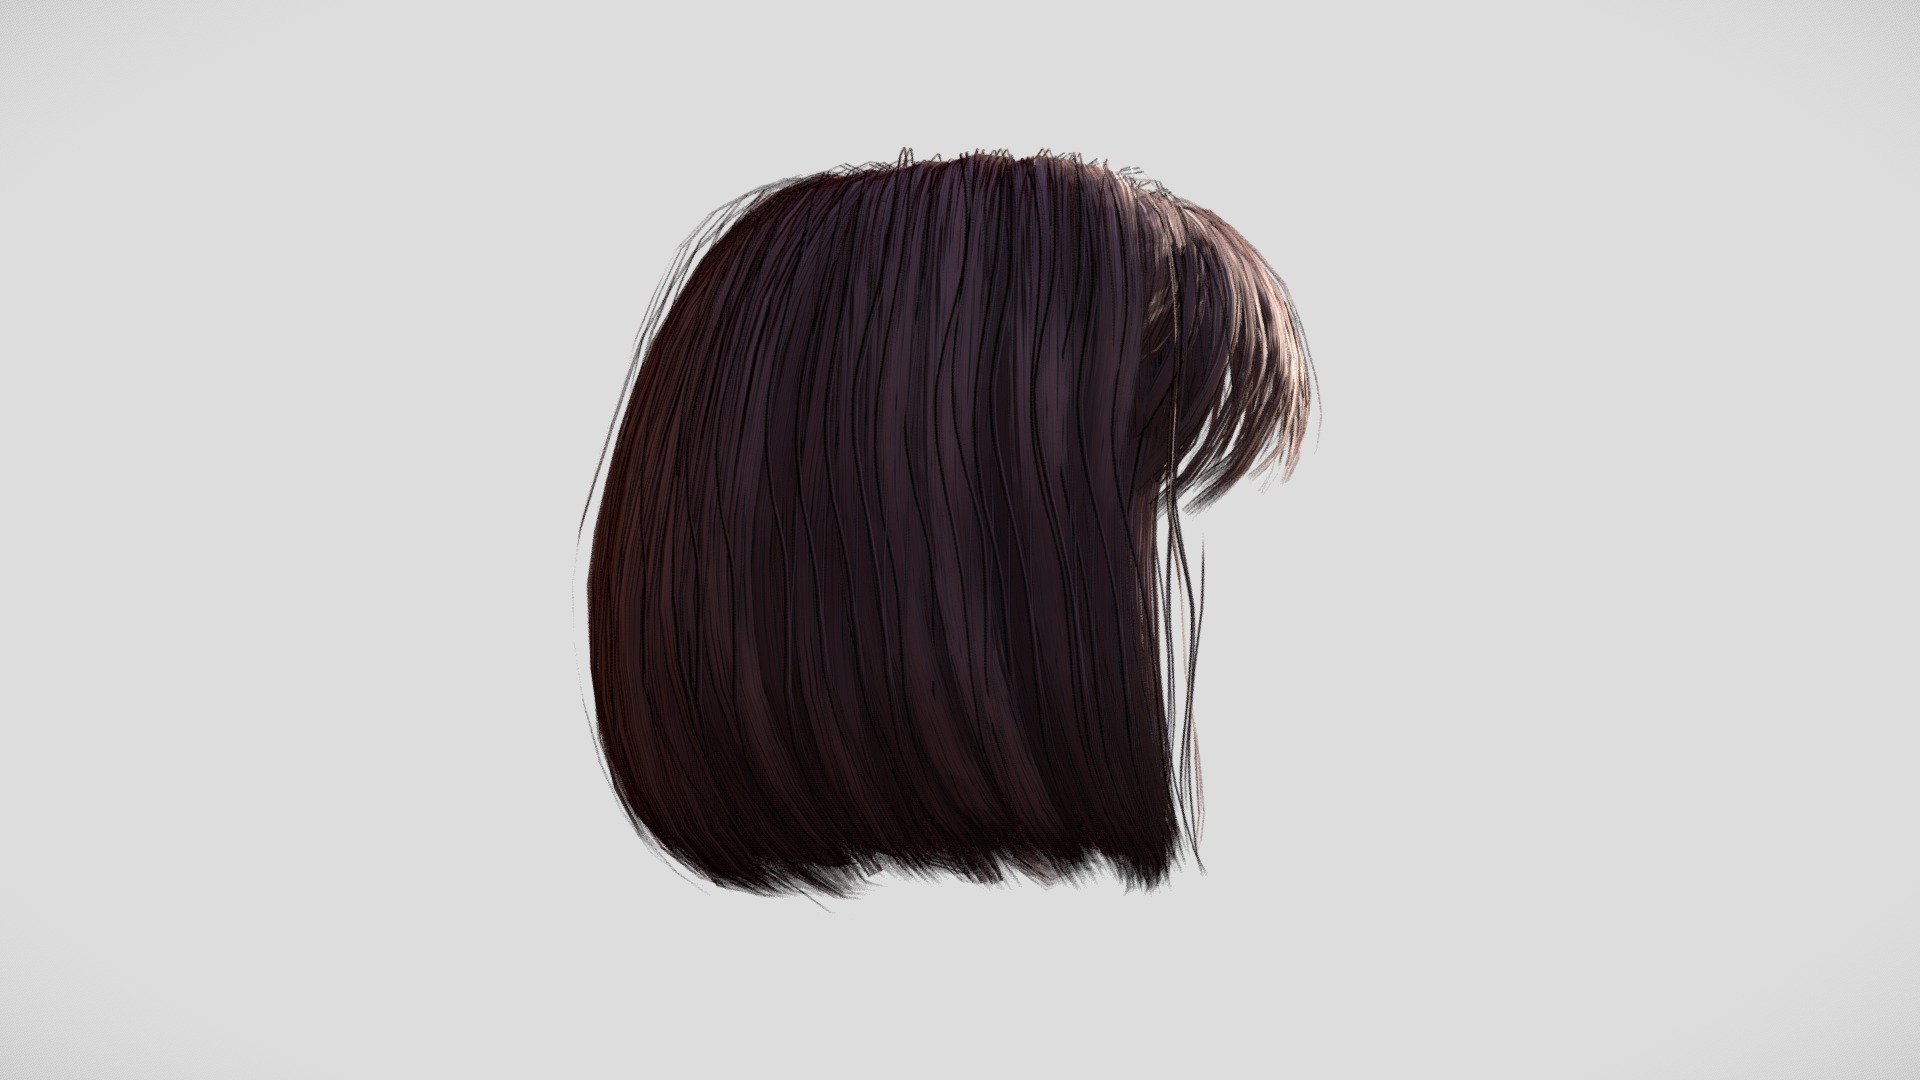 Hairstyle for your 3d character!

GEOMETRY:
The haircut is made with quad polygon geometry, a.k.a hair cards. The hair geometry is meticulously constructed with a single edge flowing through the center for easy rigging and intuitive spline manipulation.

TEXTURES:(4096x4096):
    o - used to simulate Ambient Occlusion effect
    z - used to simulate Unreal's Pixel Depth Offset effect
    flow - used to control the direction of reflection normal
    id - used for cross-strand color variation
    op - used to manipulate opacity or alpha
    root - used for gradual root coloring along the flow of the strand
    base - Base texture

The textures are compatible with the new Smart Hair system within Reallusion Character Creator, which is made to be used with both UnrealEngine and Unity.

EXTRA:
The hairstyle also includes the scalp geometry and textures to prevent the skin from peaking through the hair strands thus creating an unrealistic-looking hairstyle.

Happy characterizing!

**NOTES:
* Head not included - Female Hair - 009 - Buy Royalty Free 3D model by Scanlab Photogrammetry Inc. (@scanlabstudio) 3d model